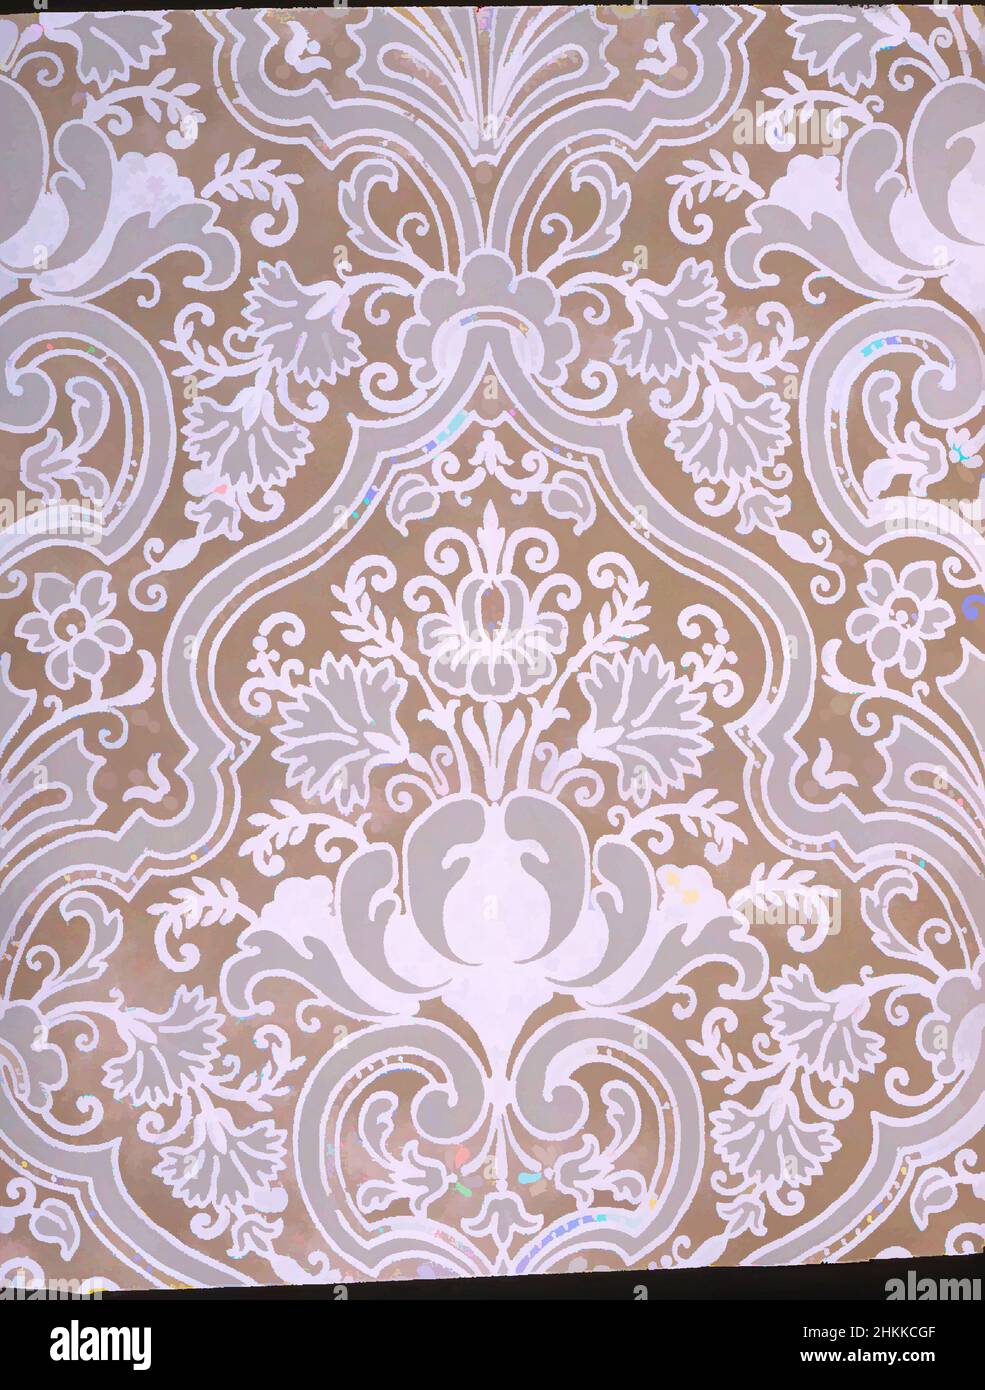 Art inspired by Wallpaper, Paper, ca. 1900, 19 3/4 x 25 1/8 in., 50.2 x 63.8 cm, Classic works modernized by Artotop with a splash of modernity. Shapes, color and value, eye-catching visual impact on art. Emotions through freedom of artworks in a contemporary way. A timeless message pursuing a wildly creative new direction. Artists turning to the digital medium and creating the Artotop NFT Stock Photo